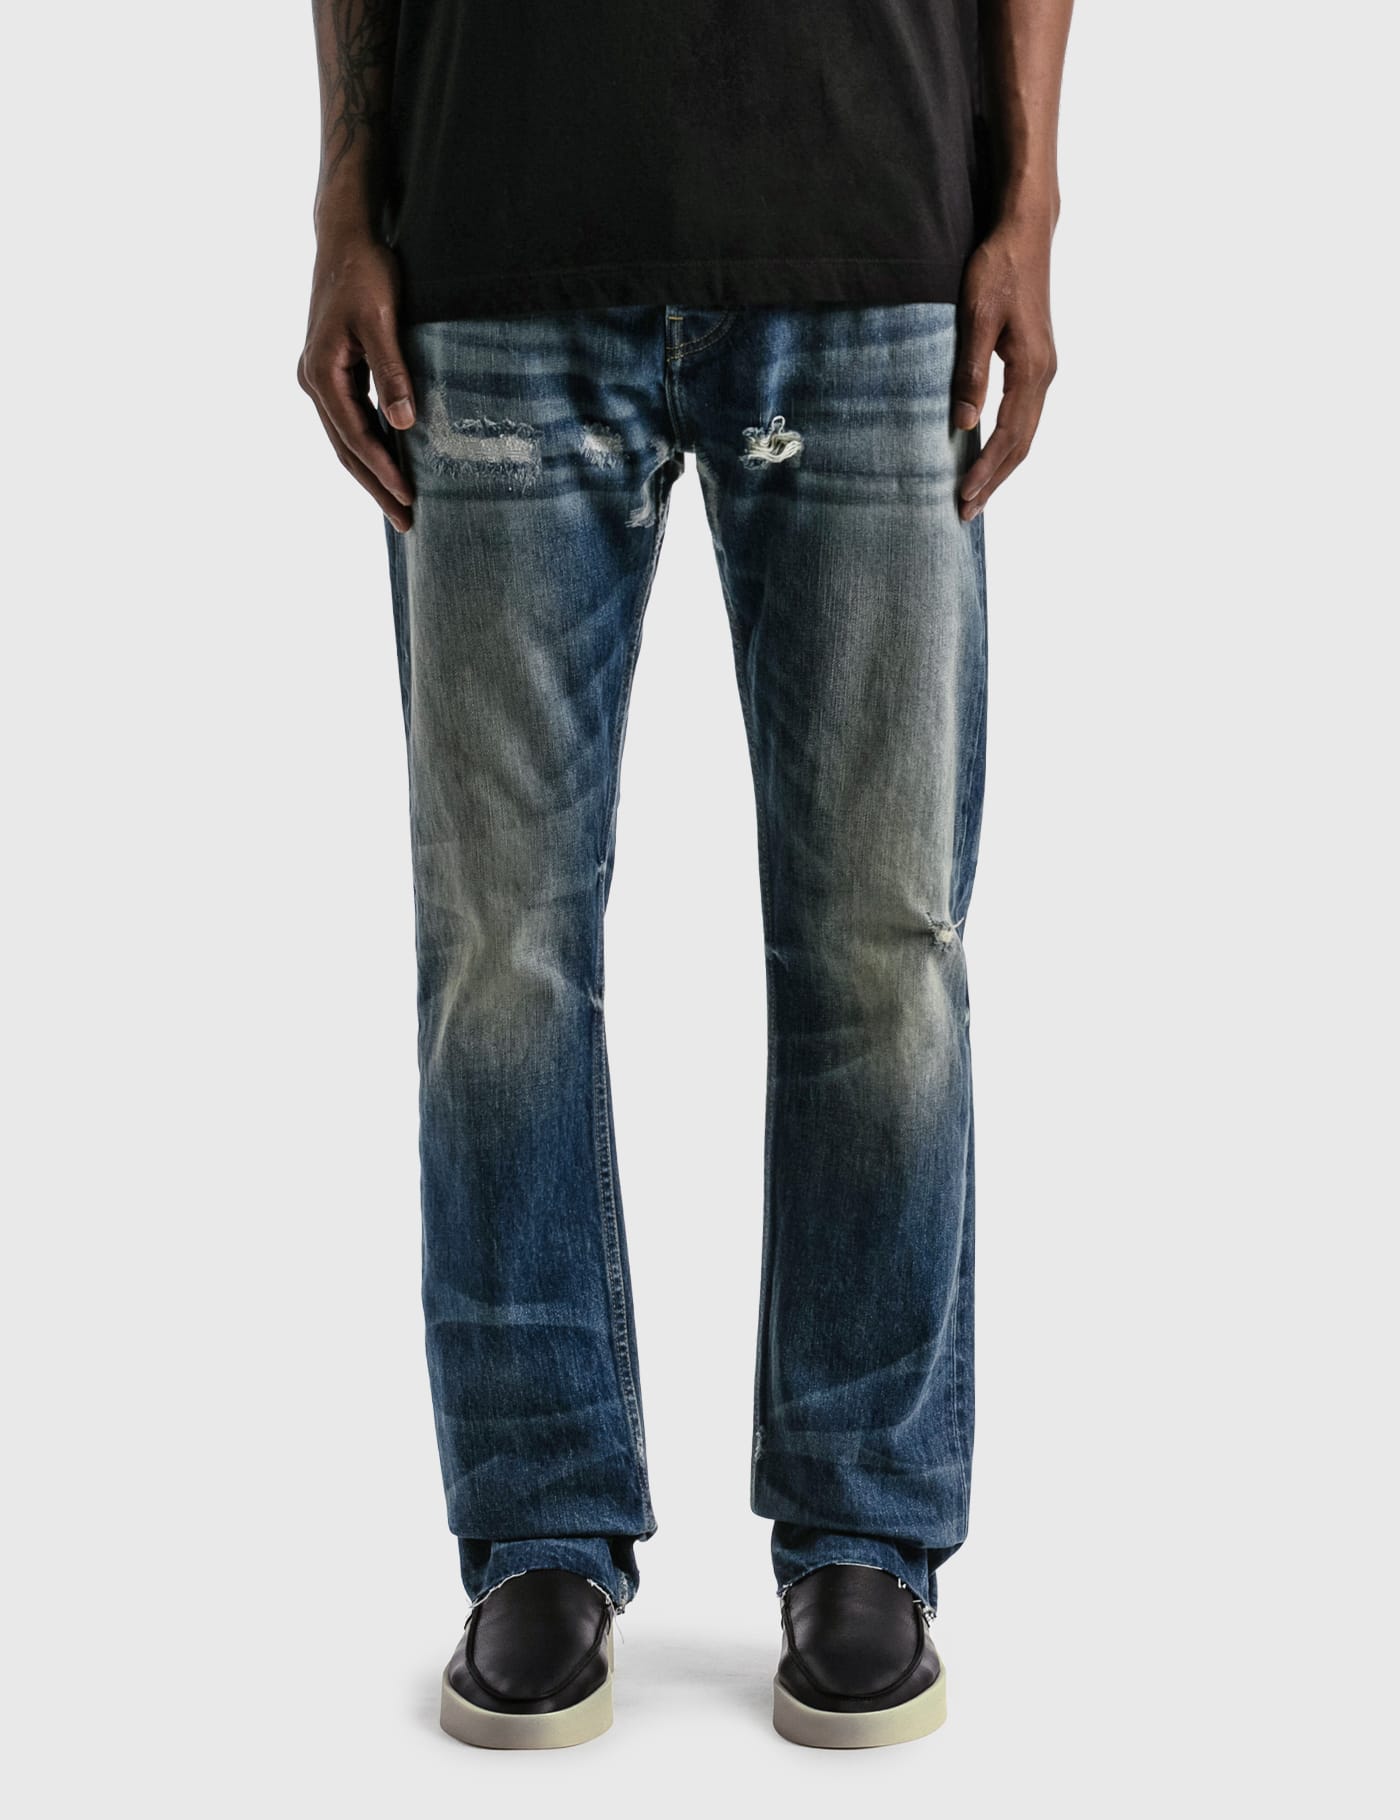 Fear of God - 7th Collection Denim Jeans | HBX - Globally Curated